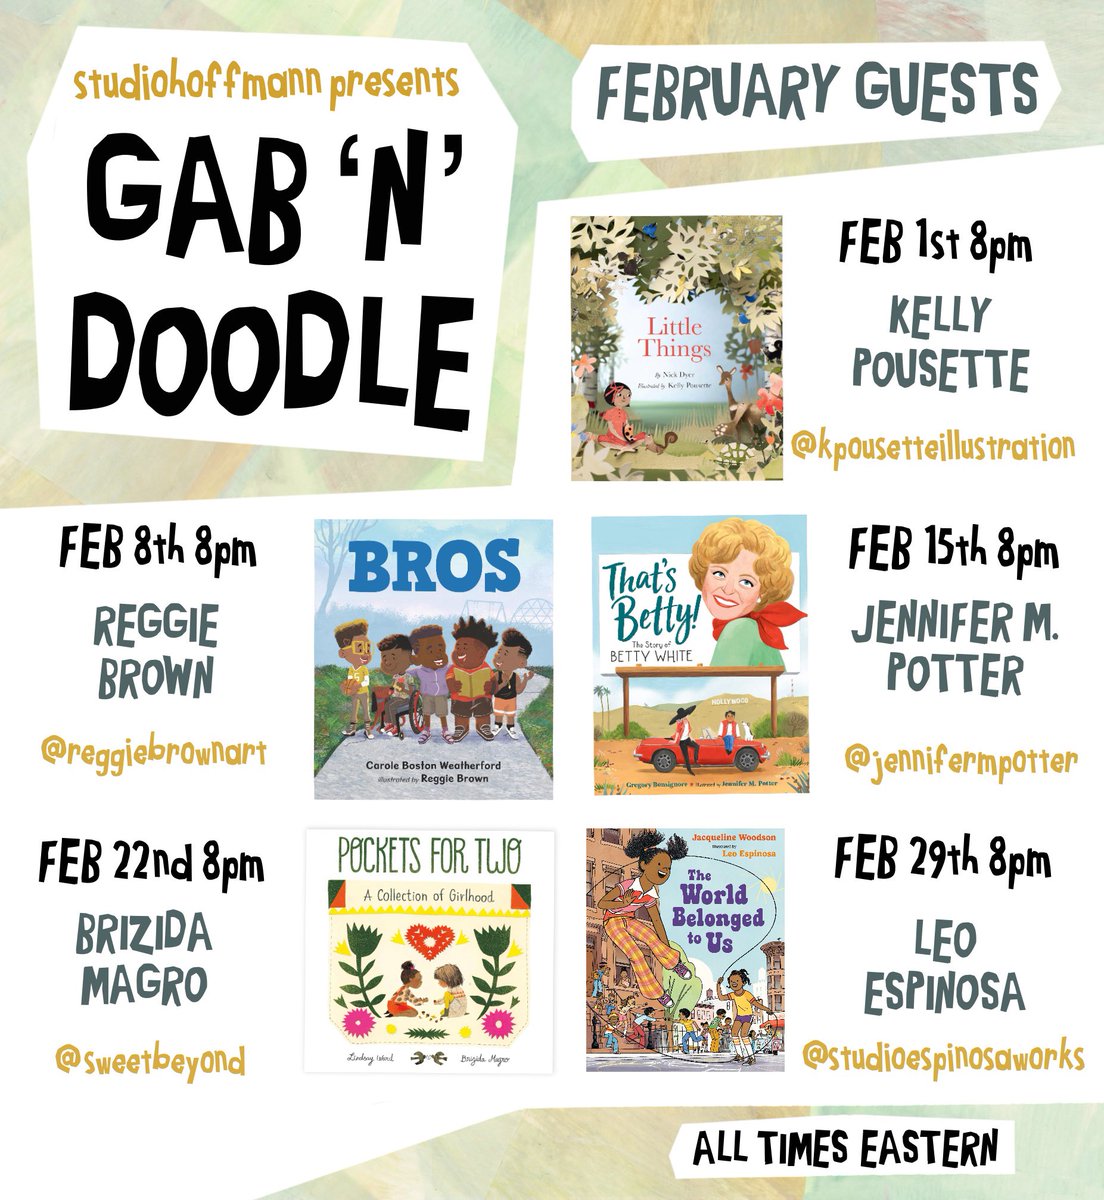 SAVE THE DATES!!! Happy Leap Year! In celebration we are having 5 guest in the shortest month for Gab ‘n’ Doodle. That’s right! 5! Even more talent than should be possible. So make sure to tune in for two scoops of fabulous illustrators. #kidlitart #kidlit